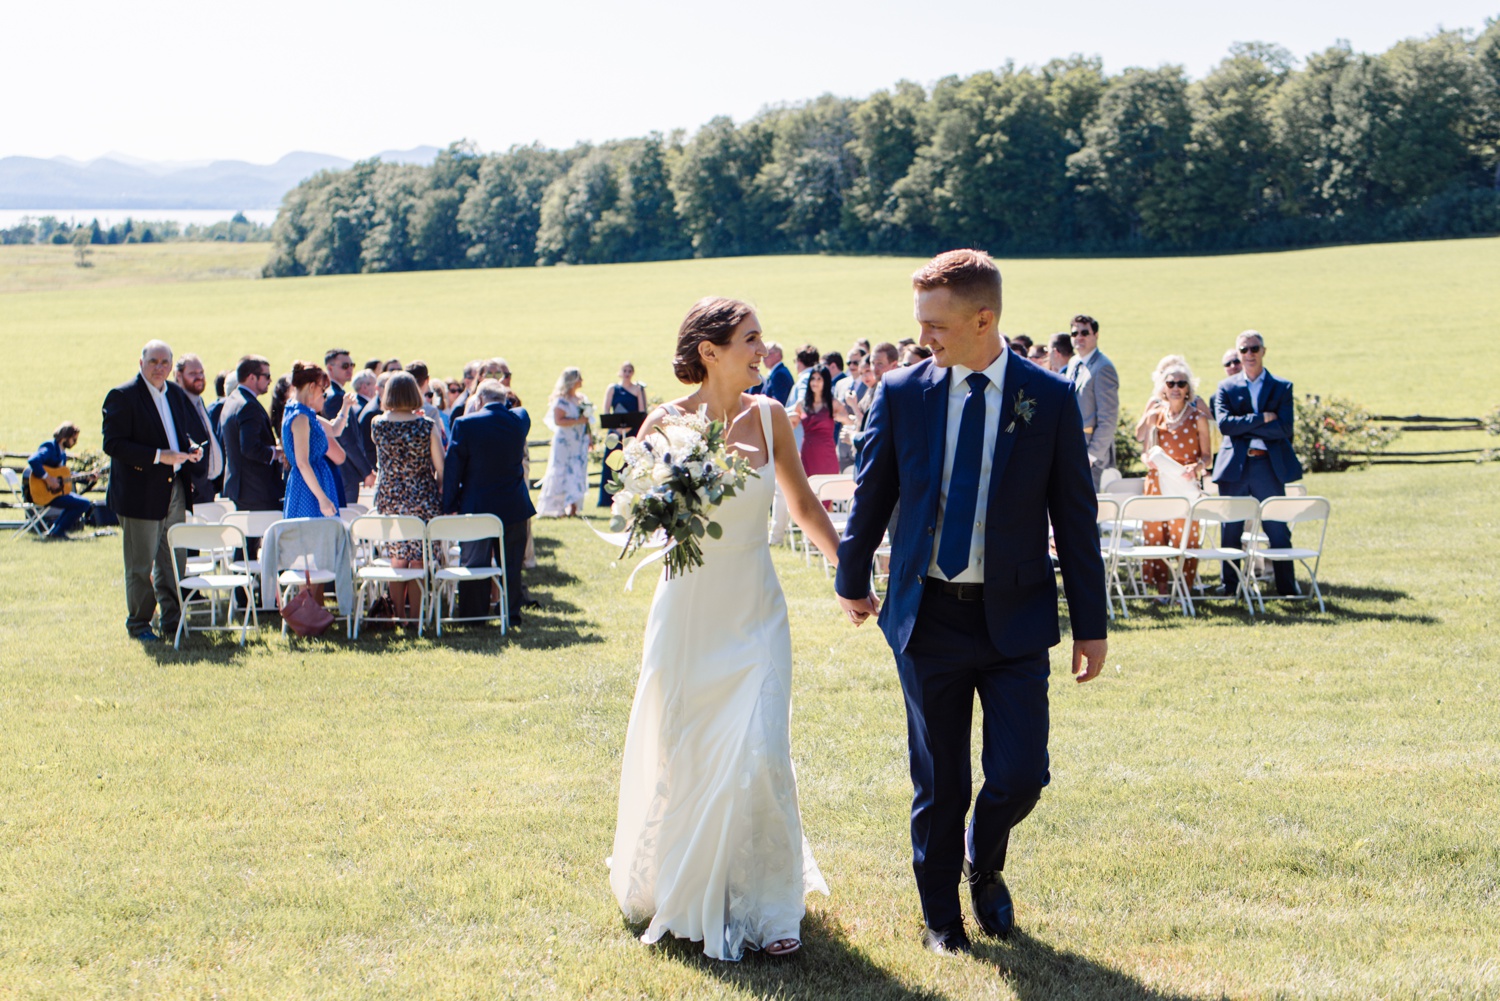 Outdoor wedding ceremony at The Brick House at Shelburne Museum